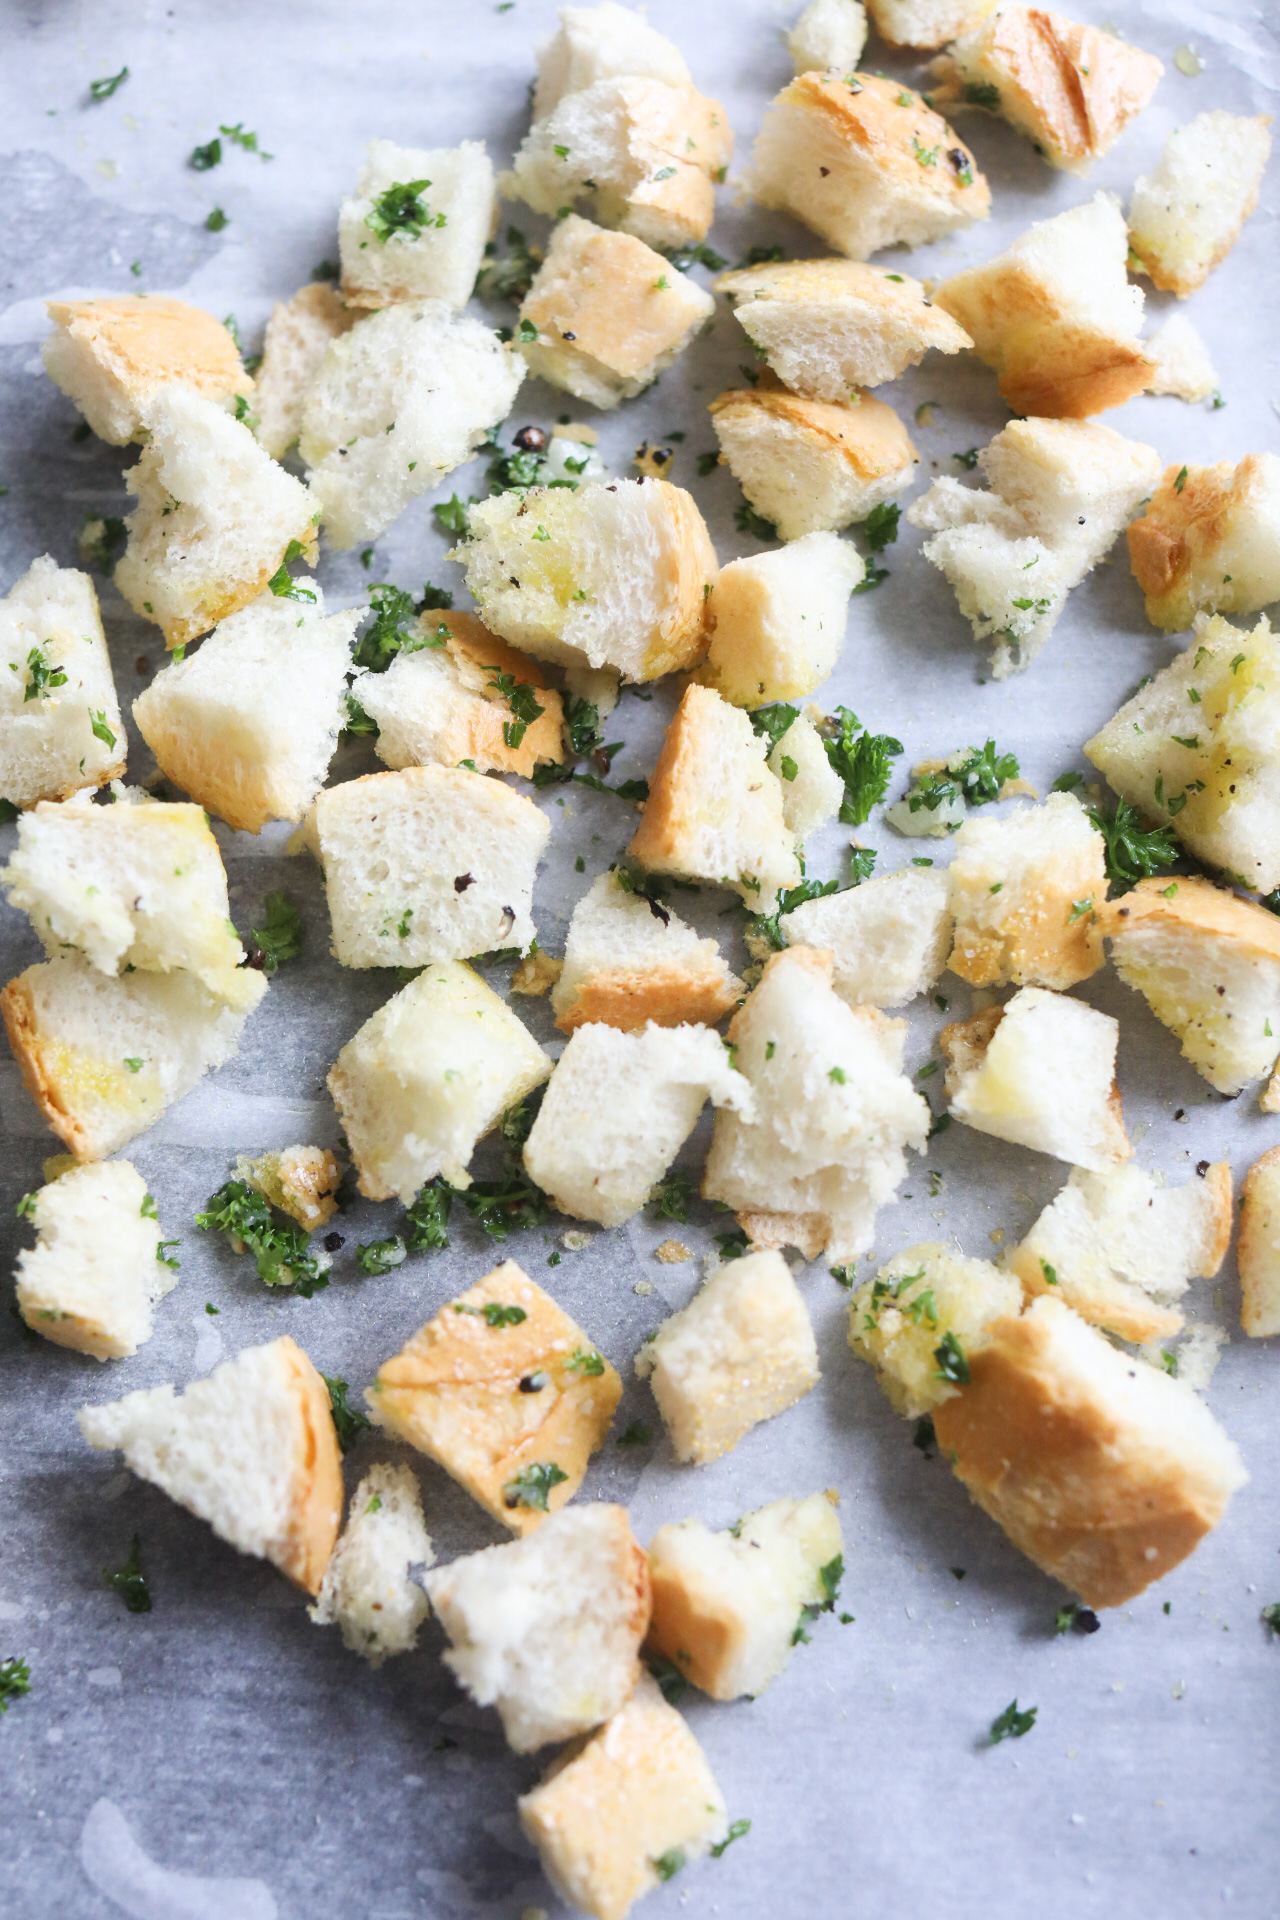 Homemade croutons on a lined baking sheet with olive oil, seasonings and herbs before being baked.